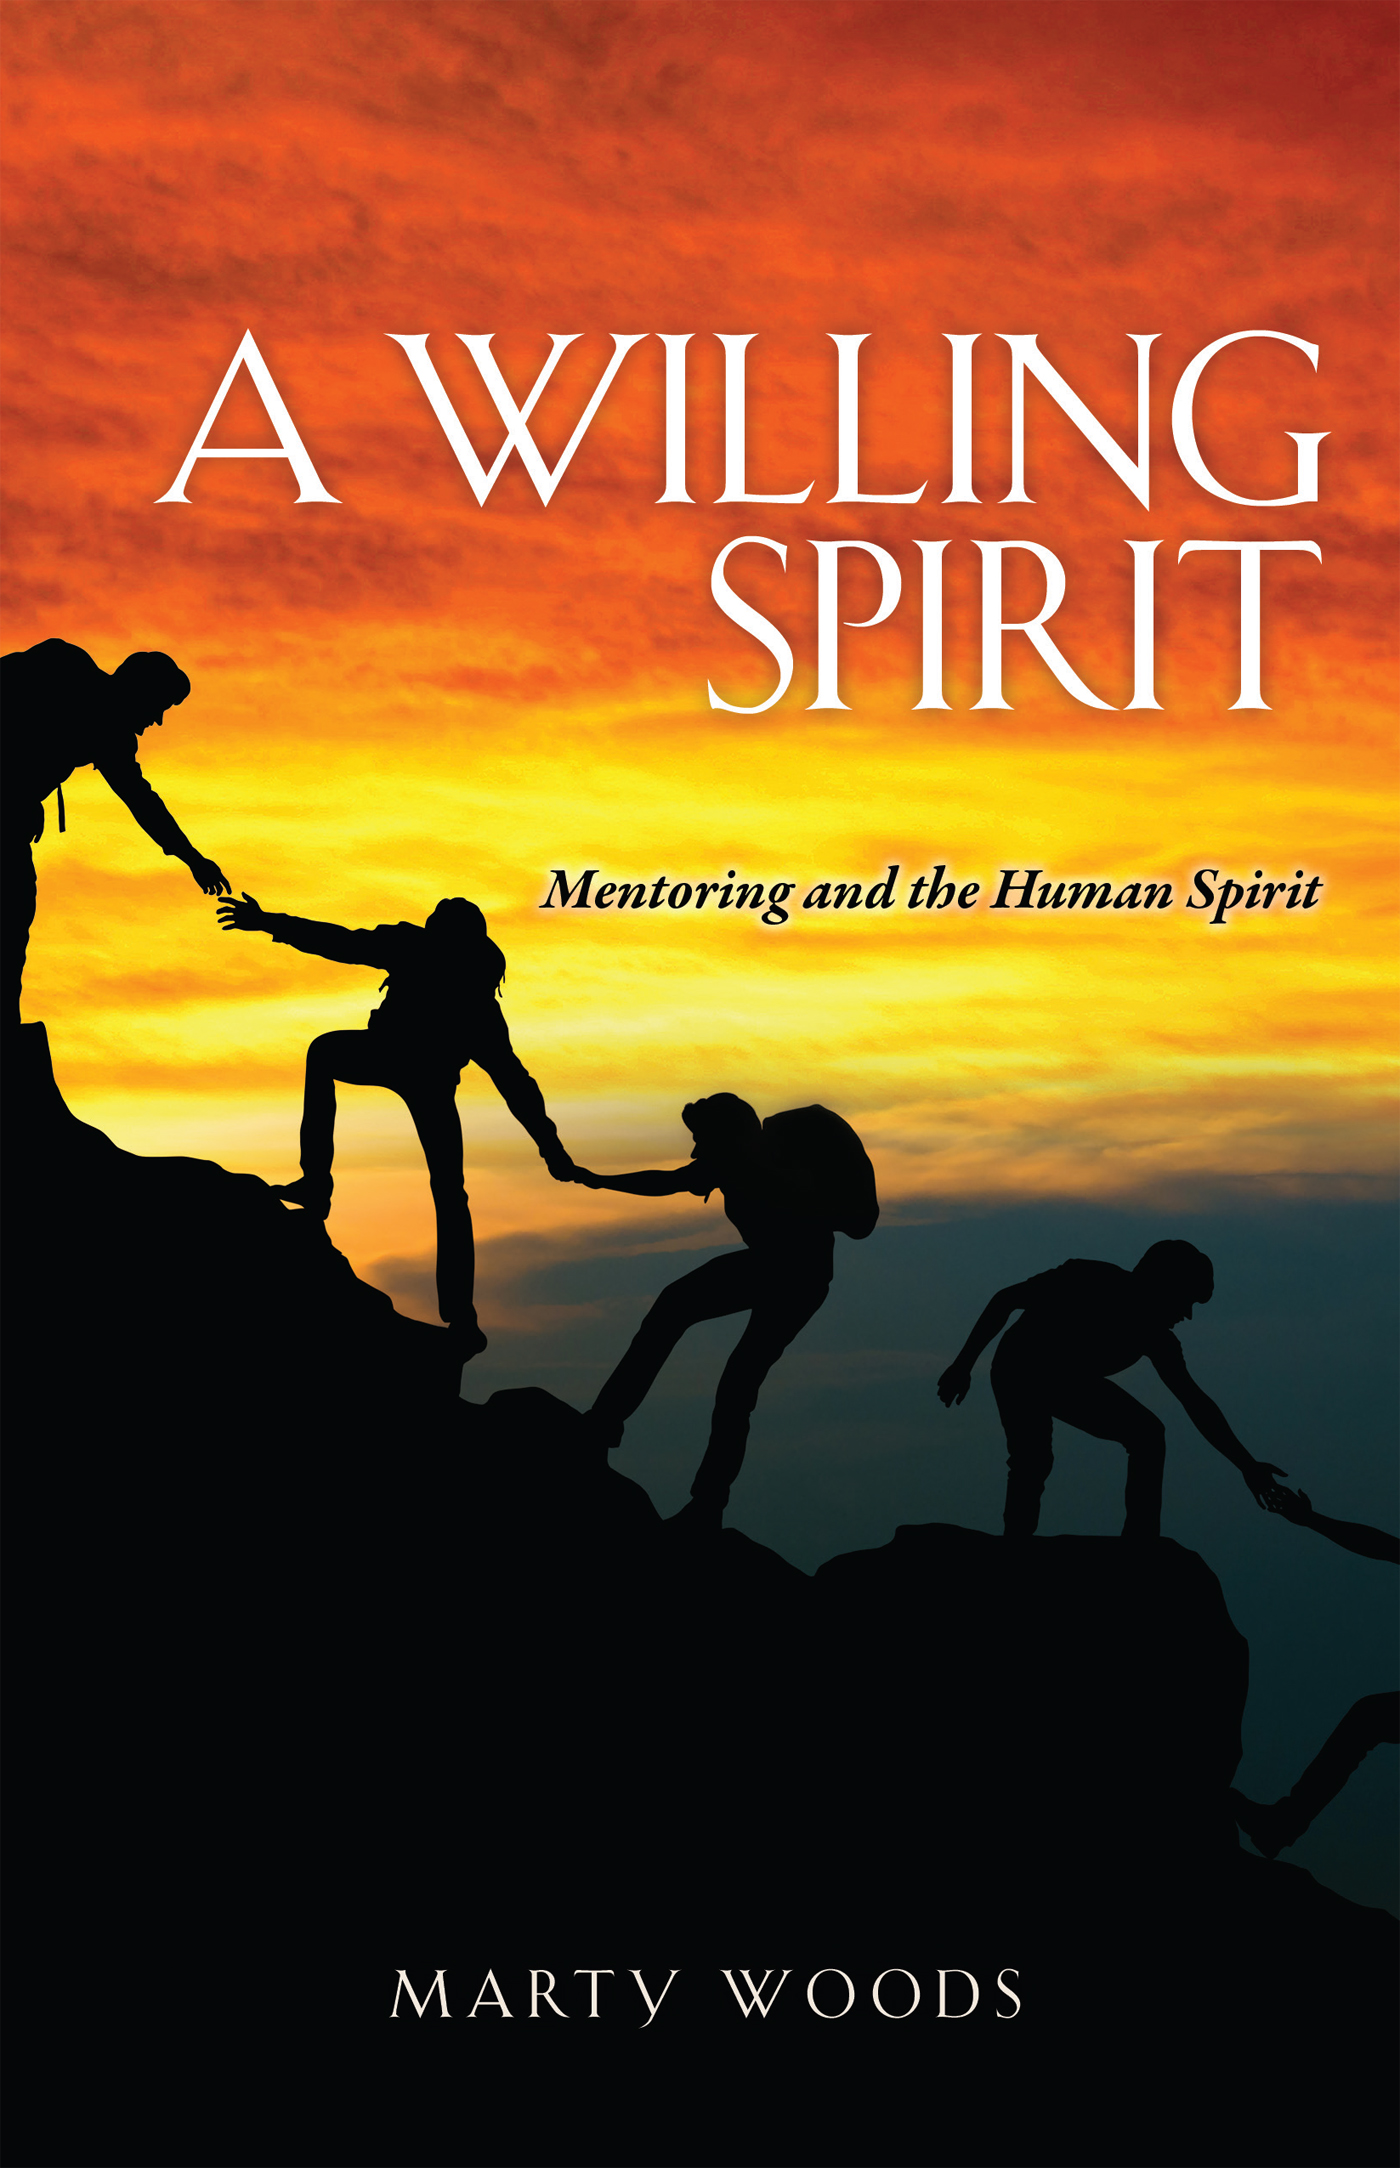 A Willing Spirit by Marty Woods a 2023 Christian book